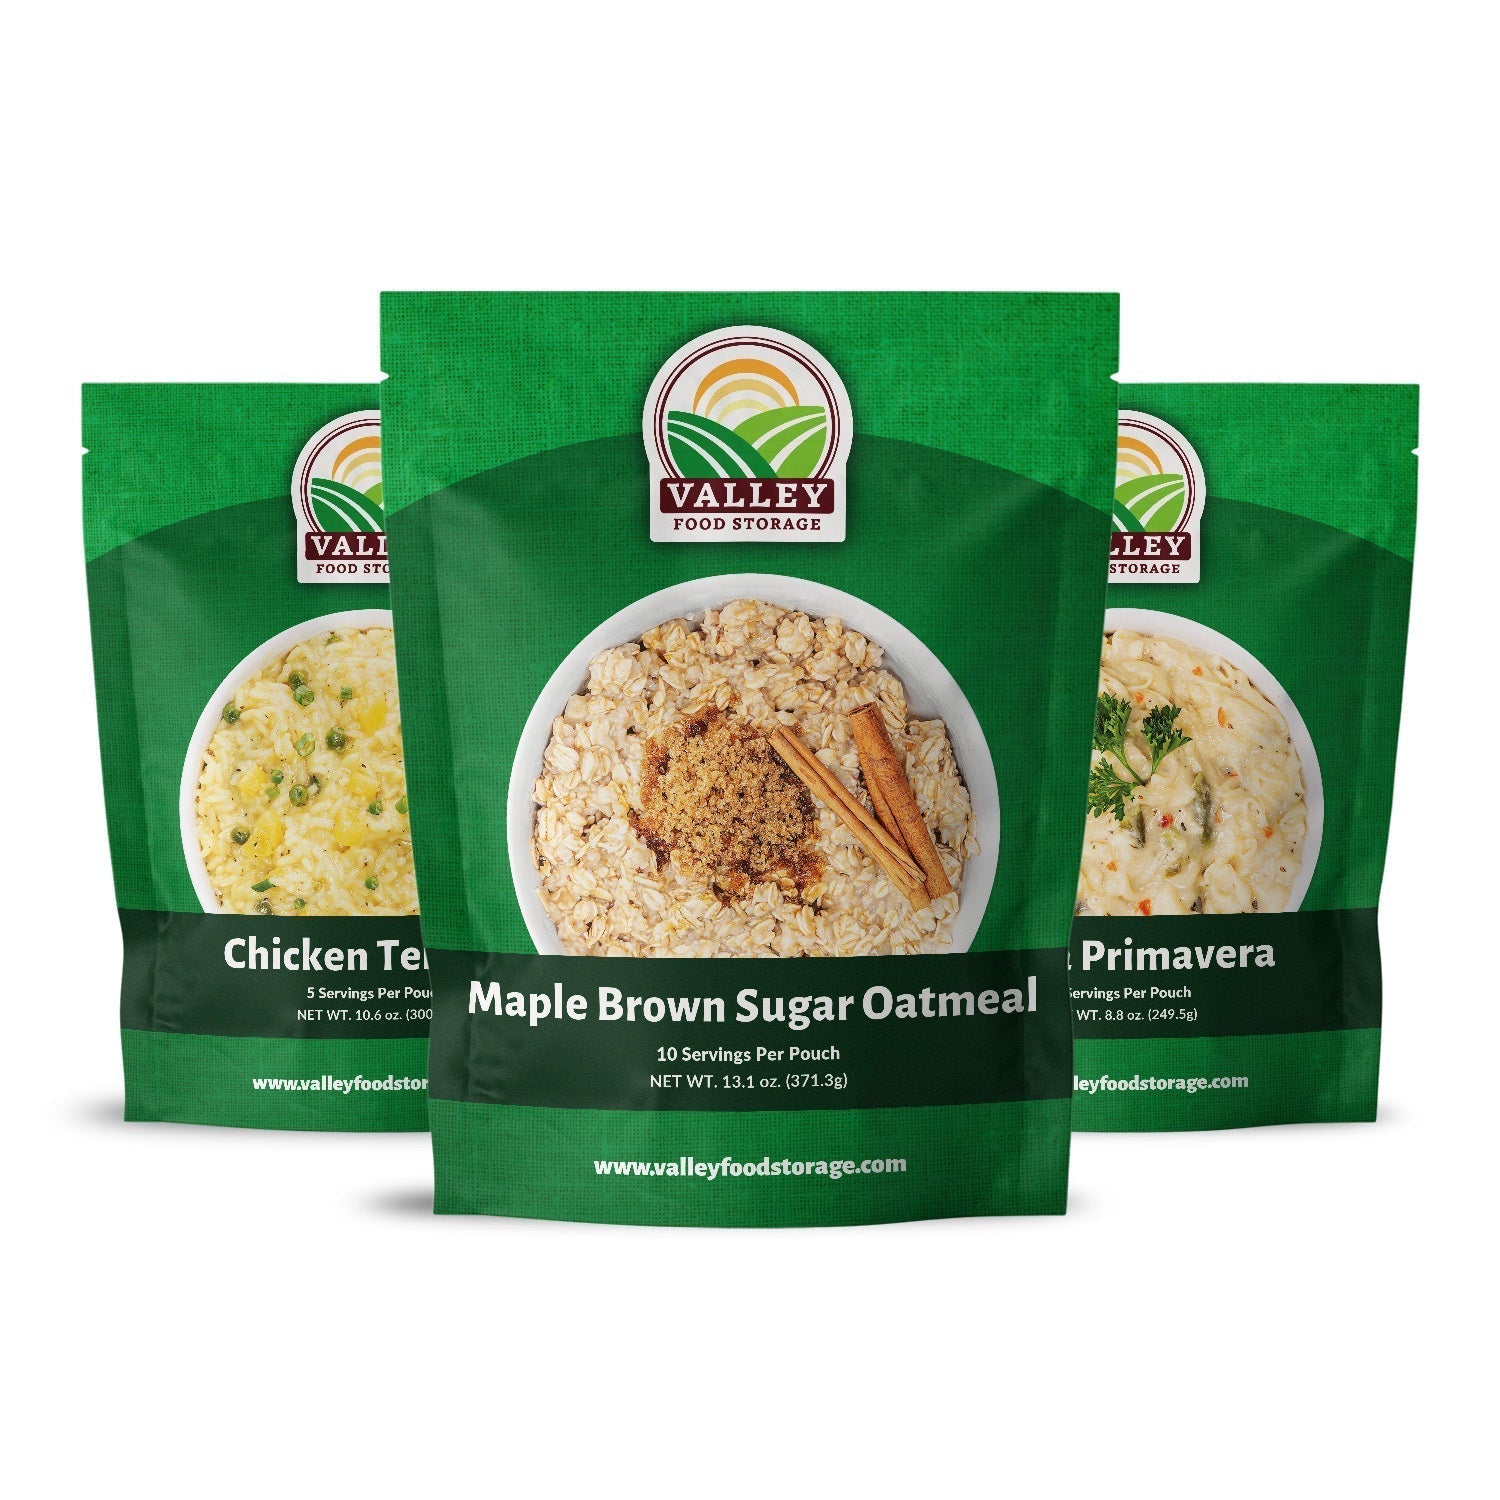 Breakfast Lunch Dinner Variety 3-pack From Valley Food Storage